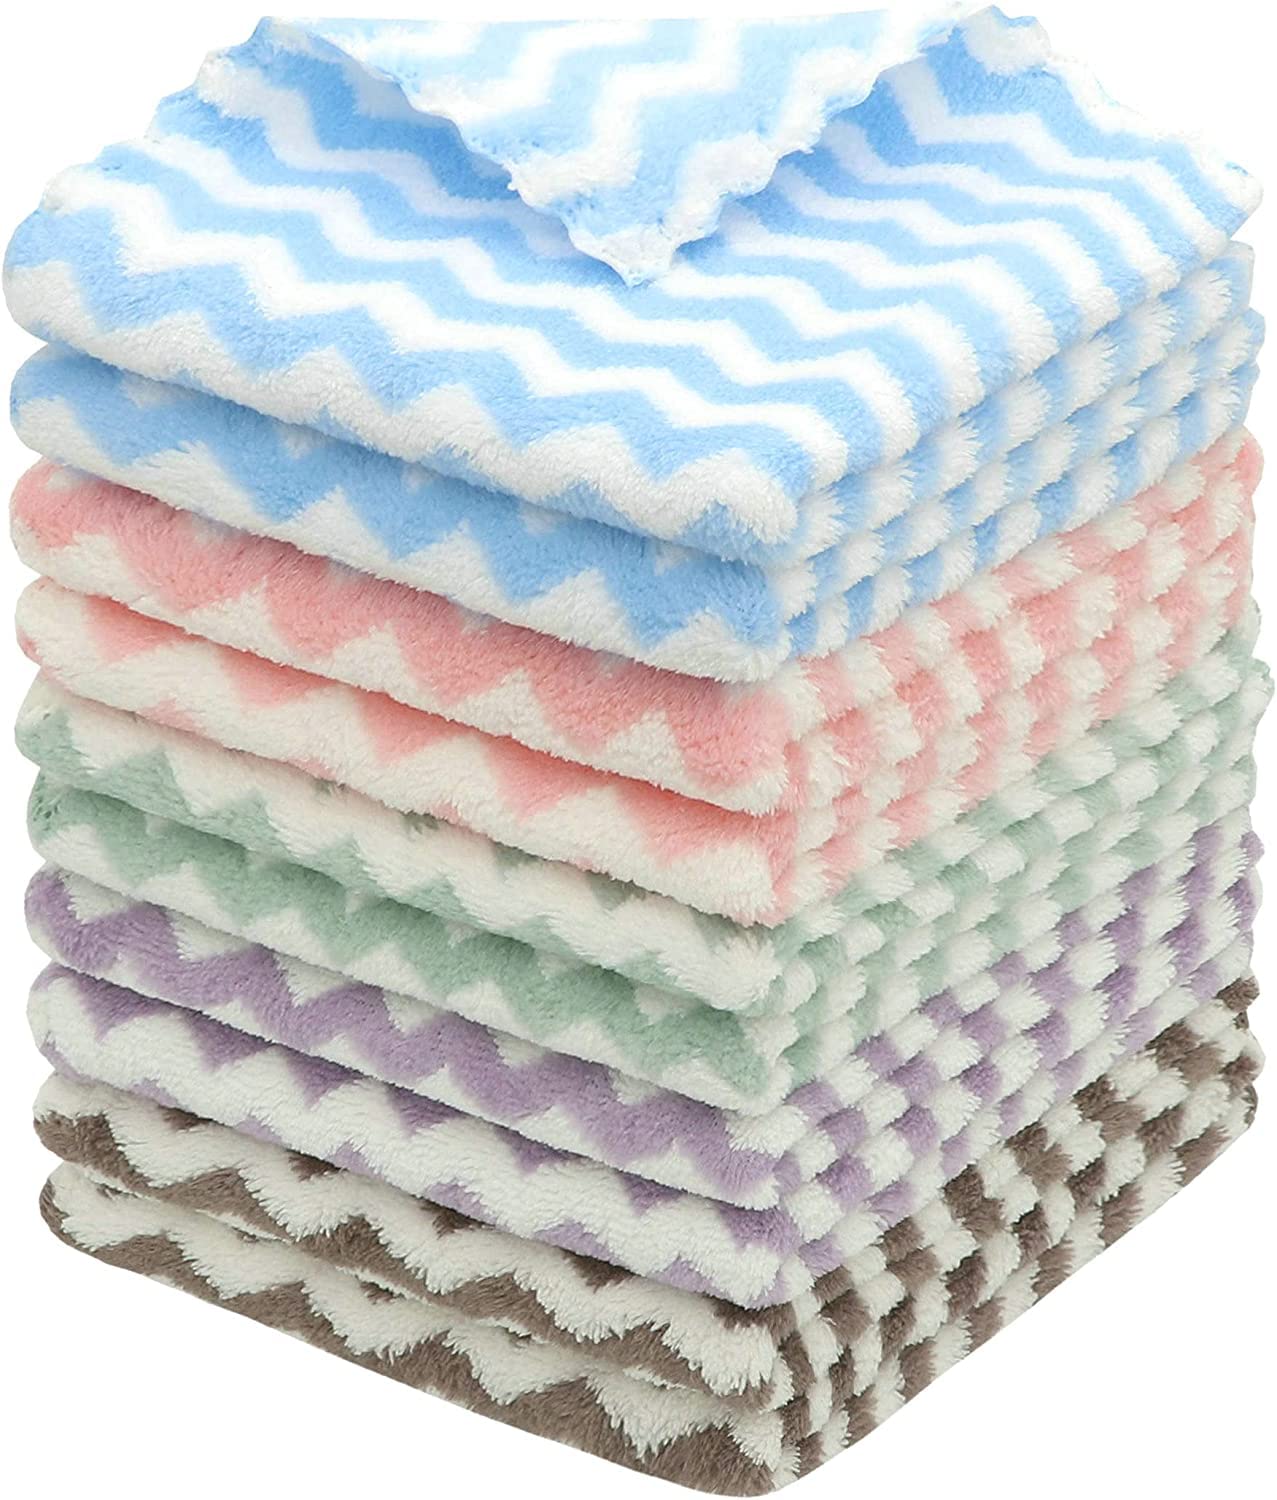 Straseapoit Microfiber Cleaning Rag, Mix Color (20)